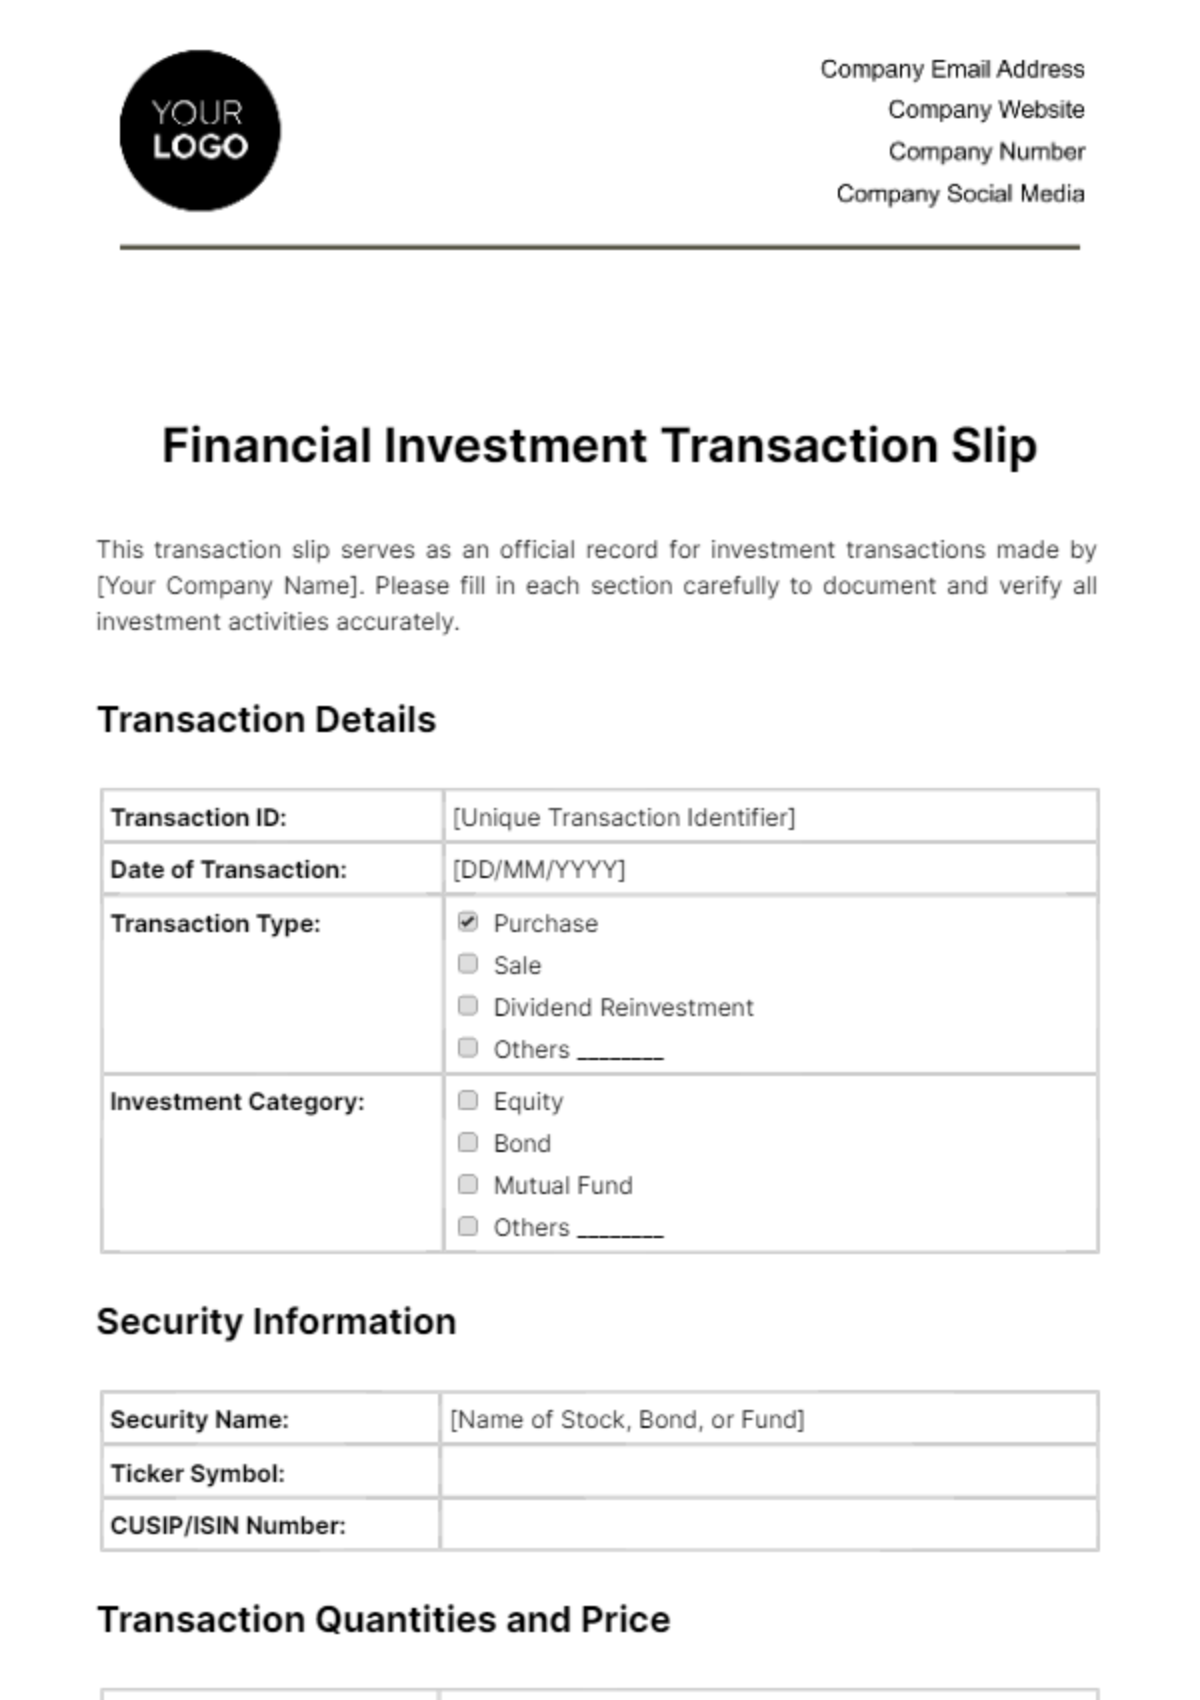 Financial Investment Transaction Slip Template